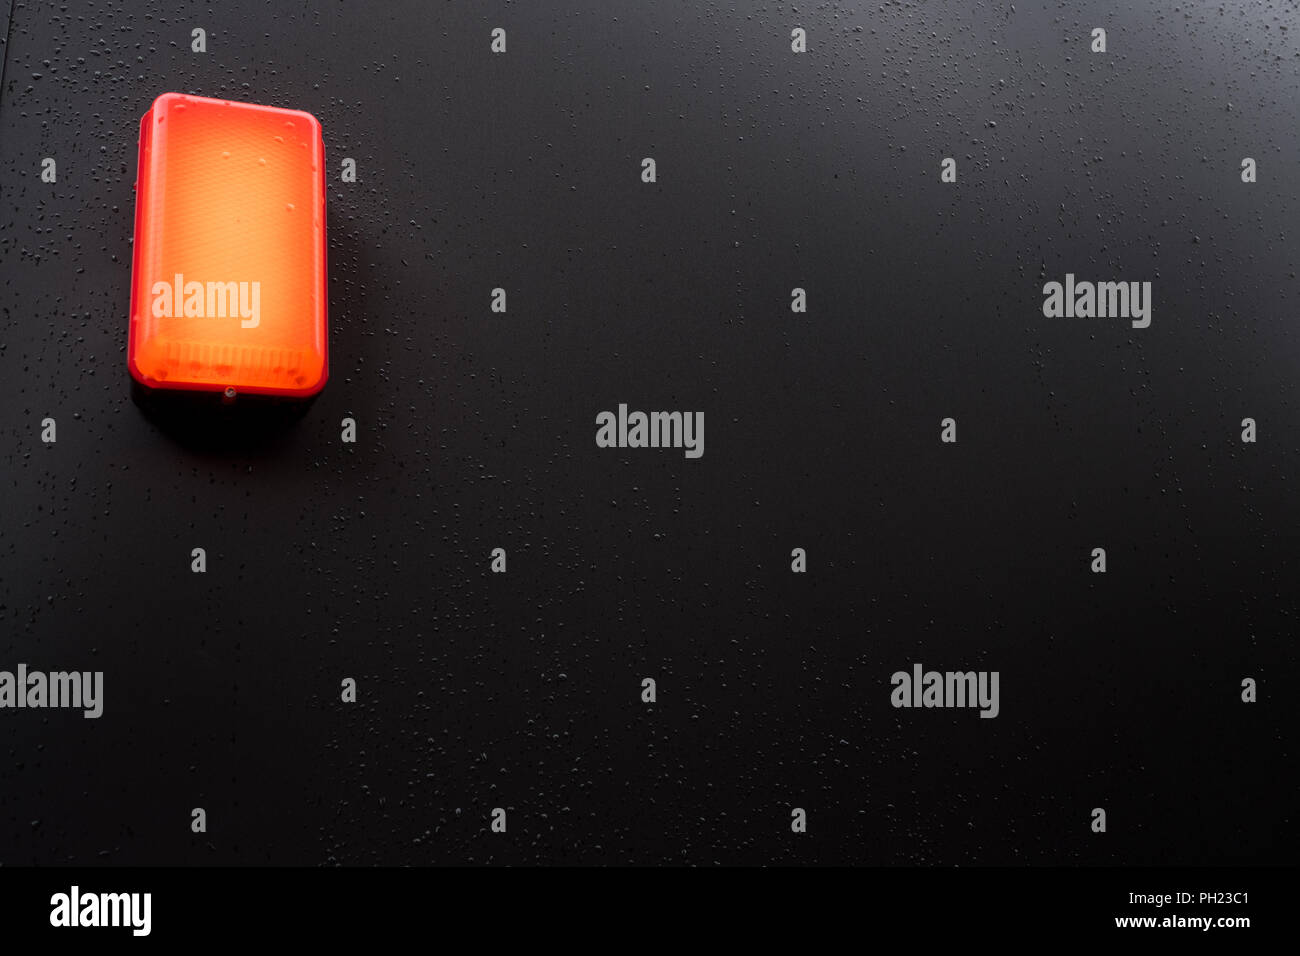 orange lamp suspended on a black wall. Image taken following rain so there are water droplets on the black wall Stock Photo